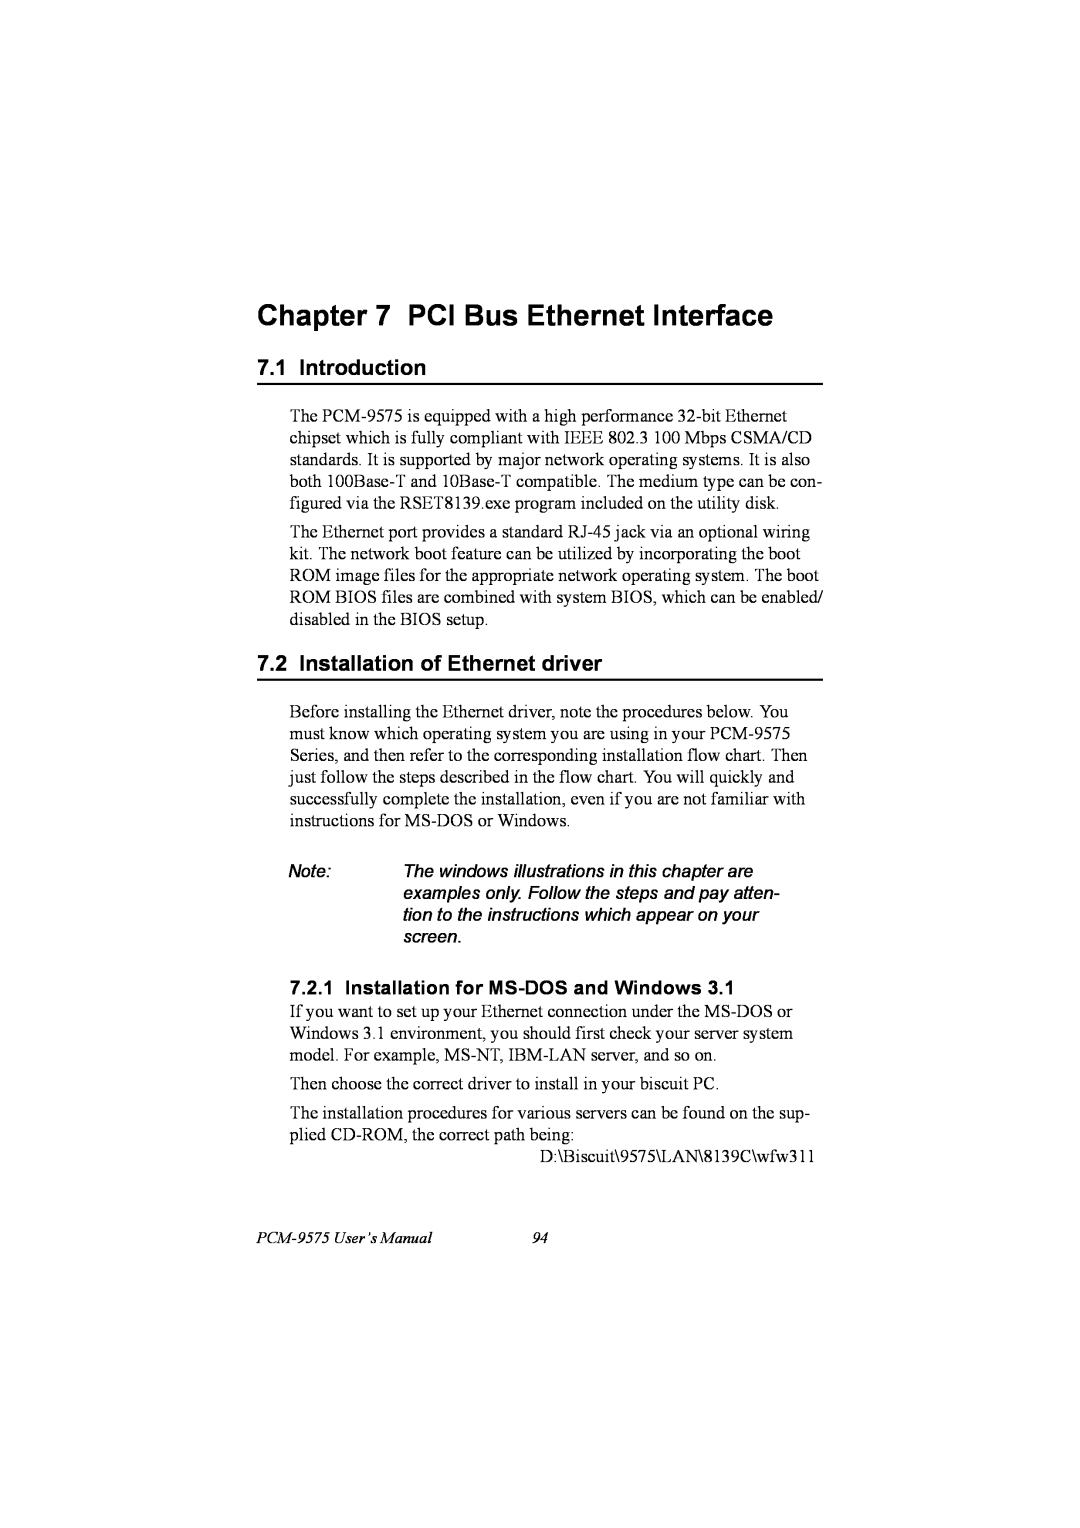 IBM PCM-9575, 100/10 user manual PCI Bus Ethernet Interface, Introduction, Installation of Ethernet driver, screen 